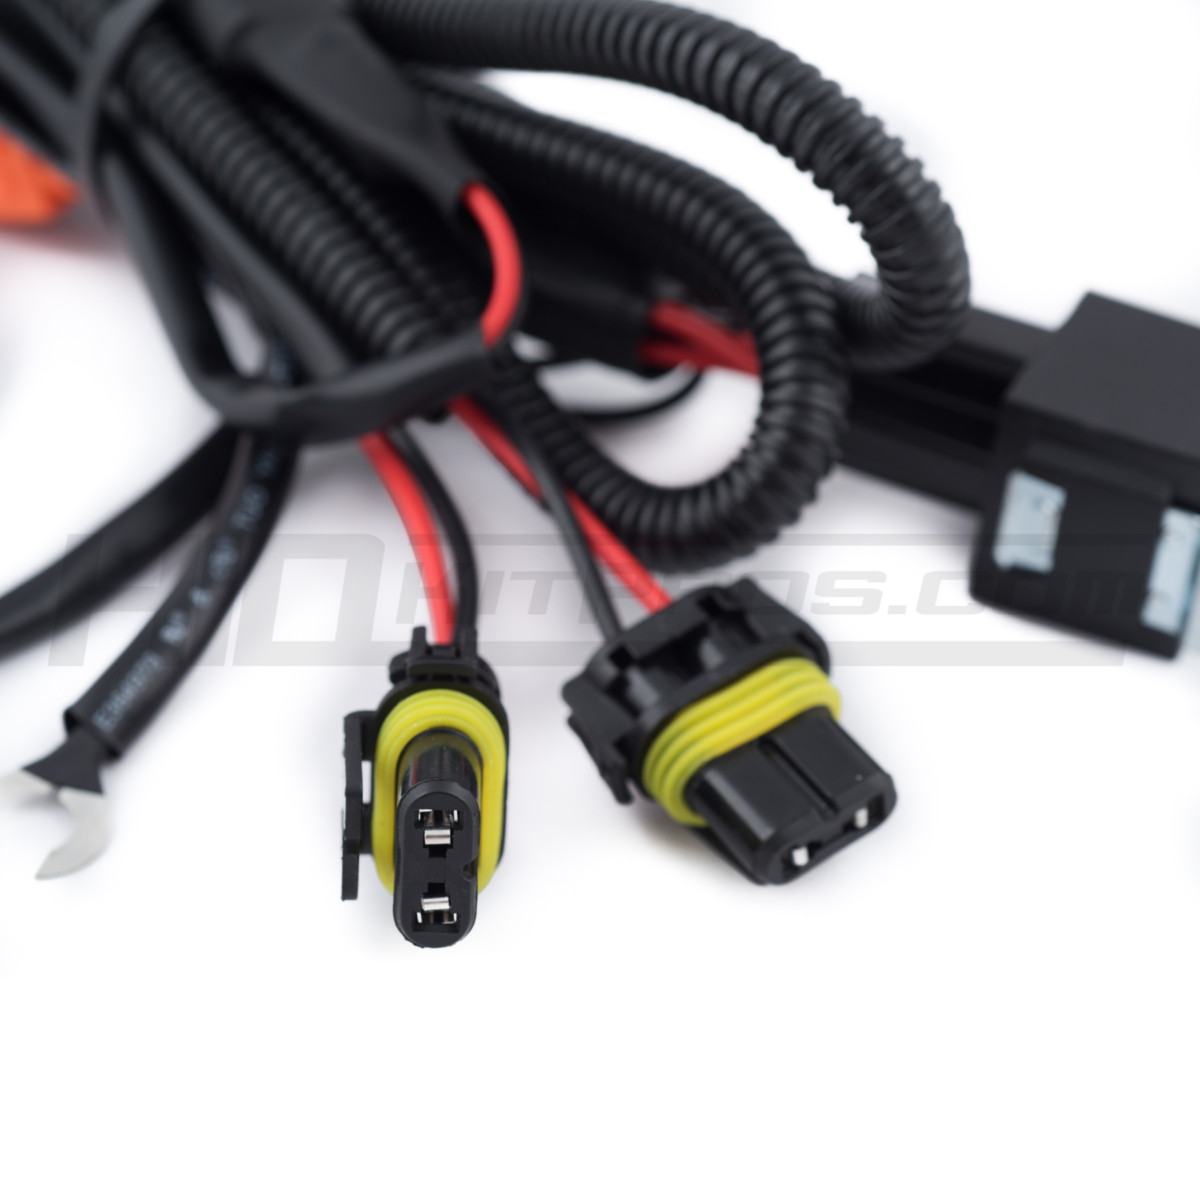 1x BRITELEDS HID Relay Harness Anti-Flicker Power Wiring Universal Compatible 